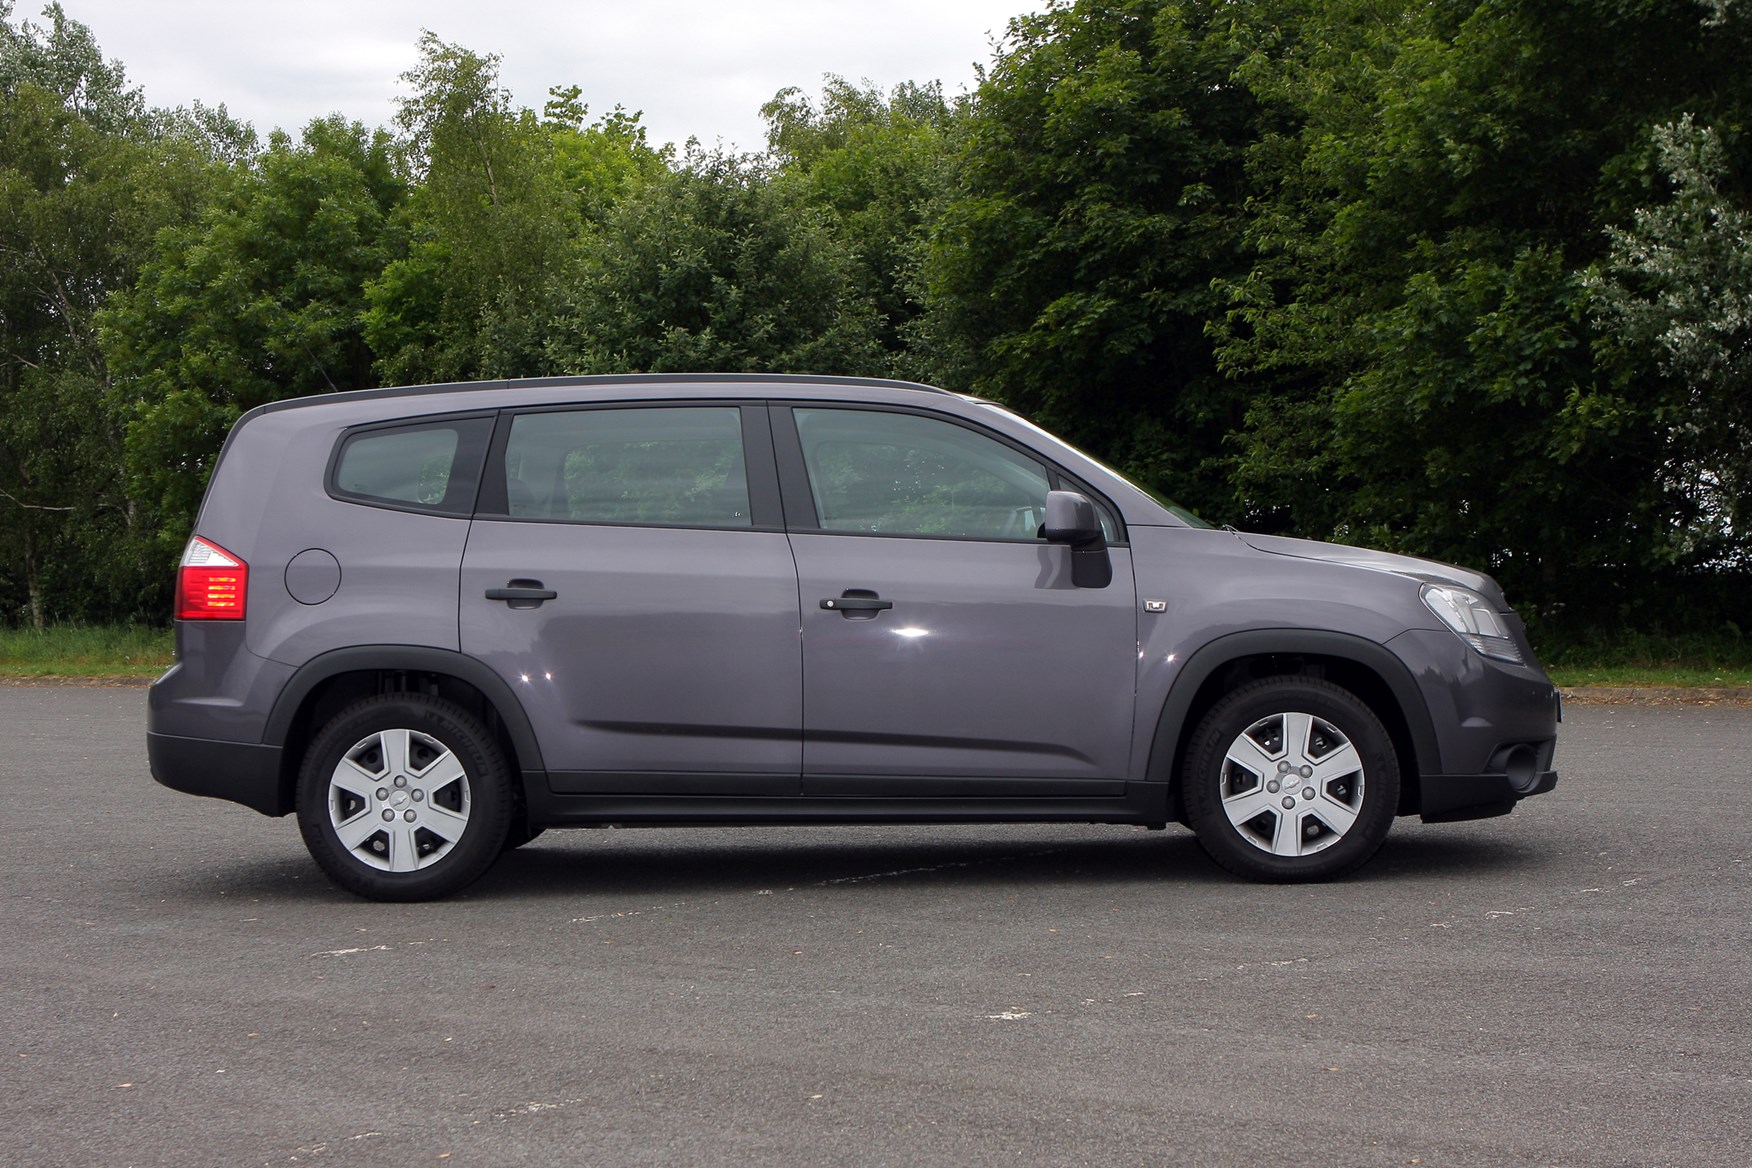 Used Chevrolet Orlando Estate (2011 - 2015) Review | Parkers